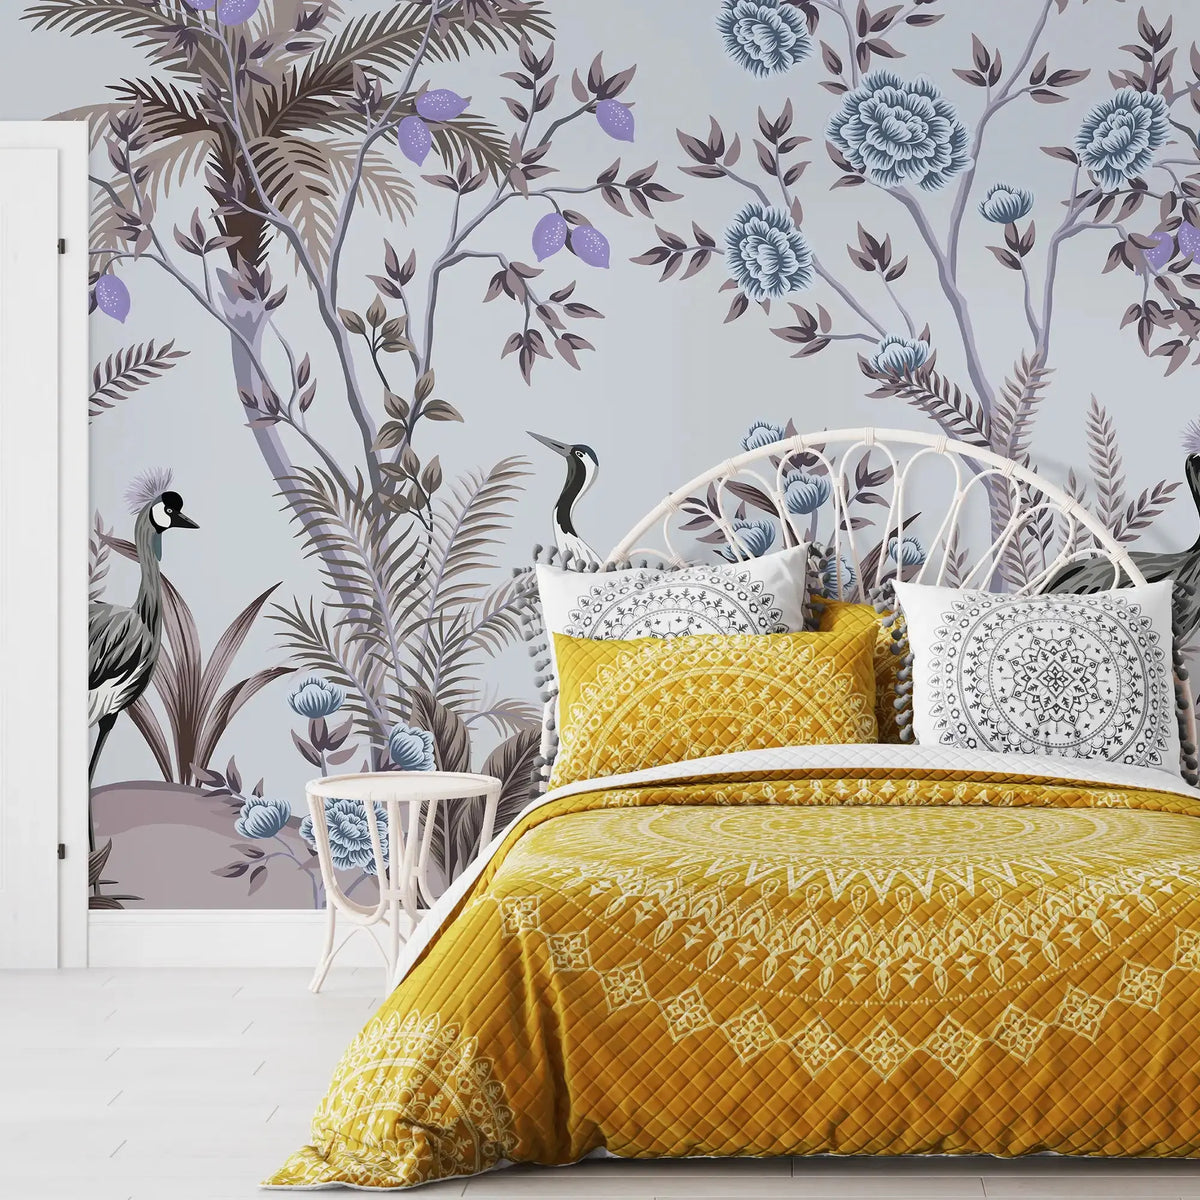 3107-D / Peelable Asian Wallpaper - Oriental Style with Cranes and Flowers - Easy Install Wall Mural - Artevella